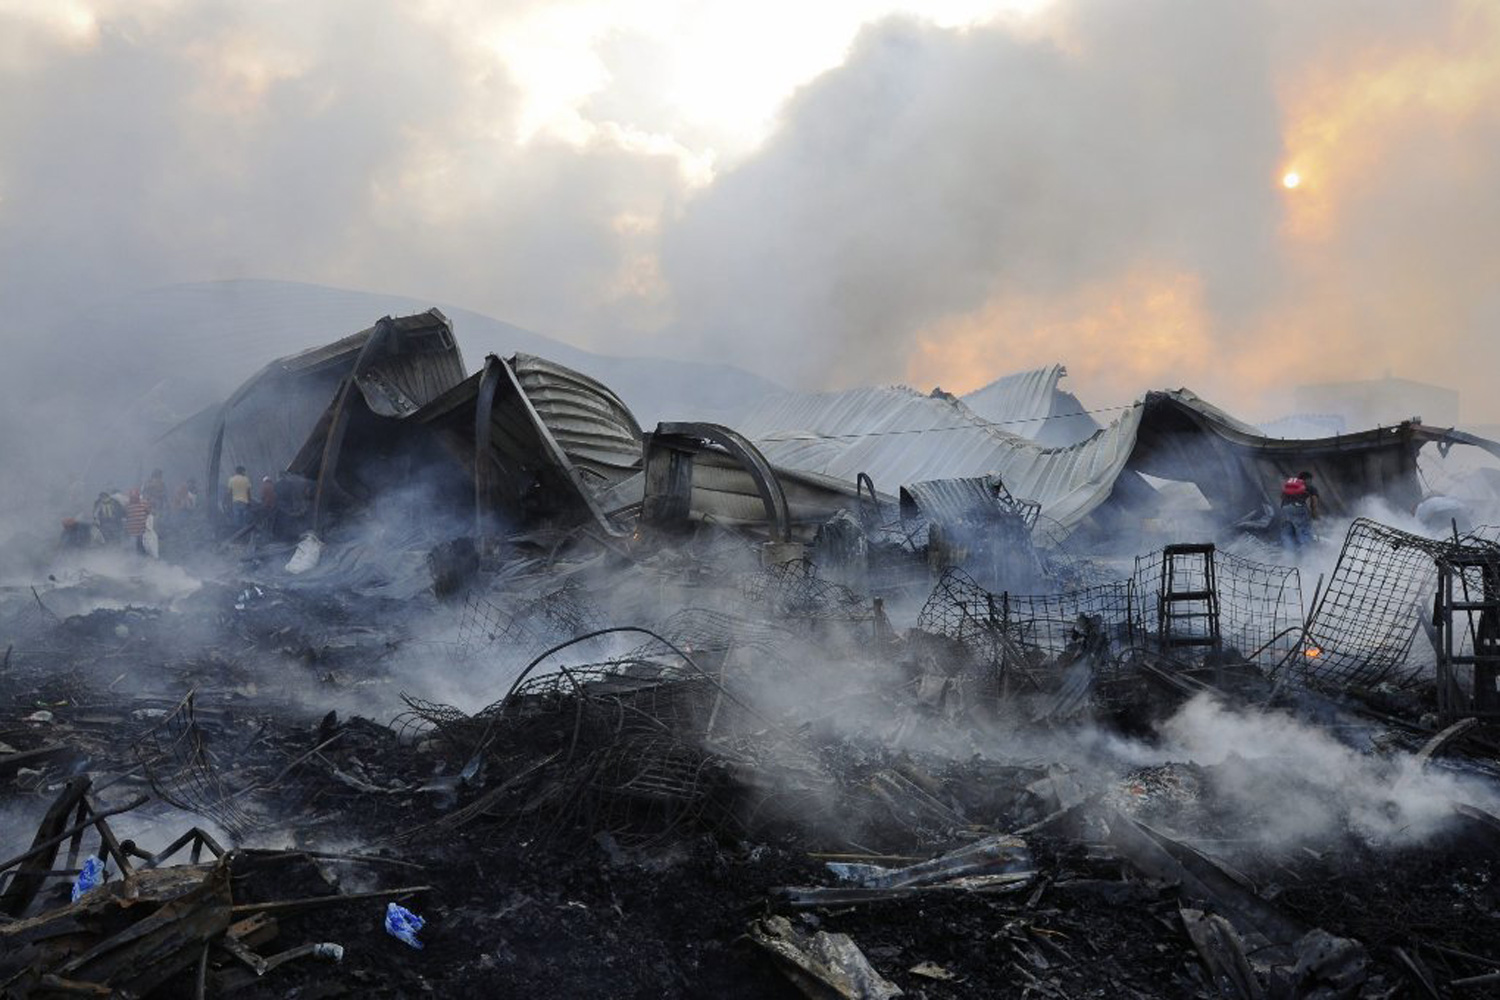 Feb. 18, 2012. Debris is seen after a fire in a market in Tegucigalpa, Honduras. The fire started in Colon Market, and spread to the adjacent San Isidro Market.